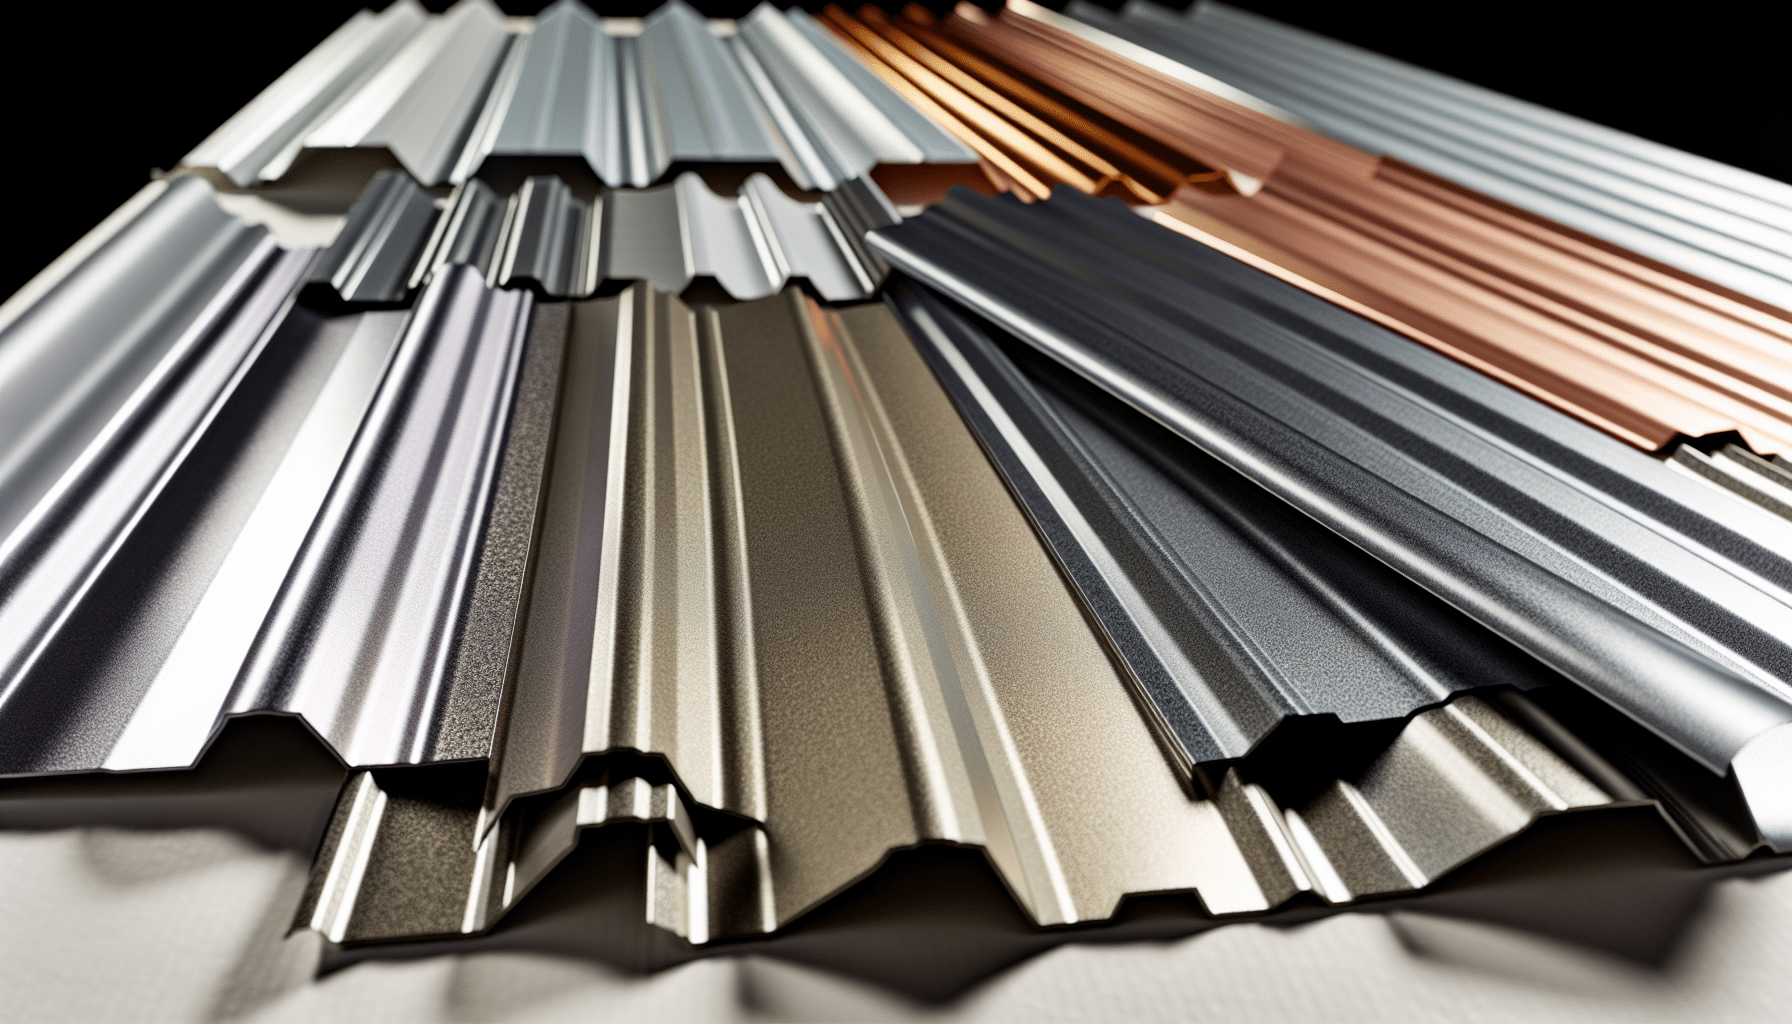 Various standing seam metal roof panels in different materials